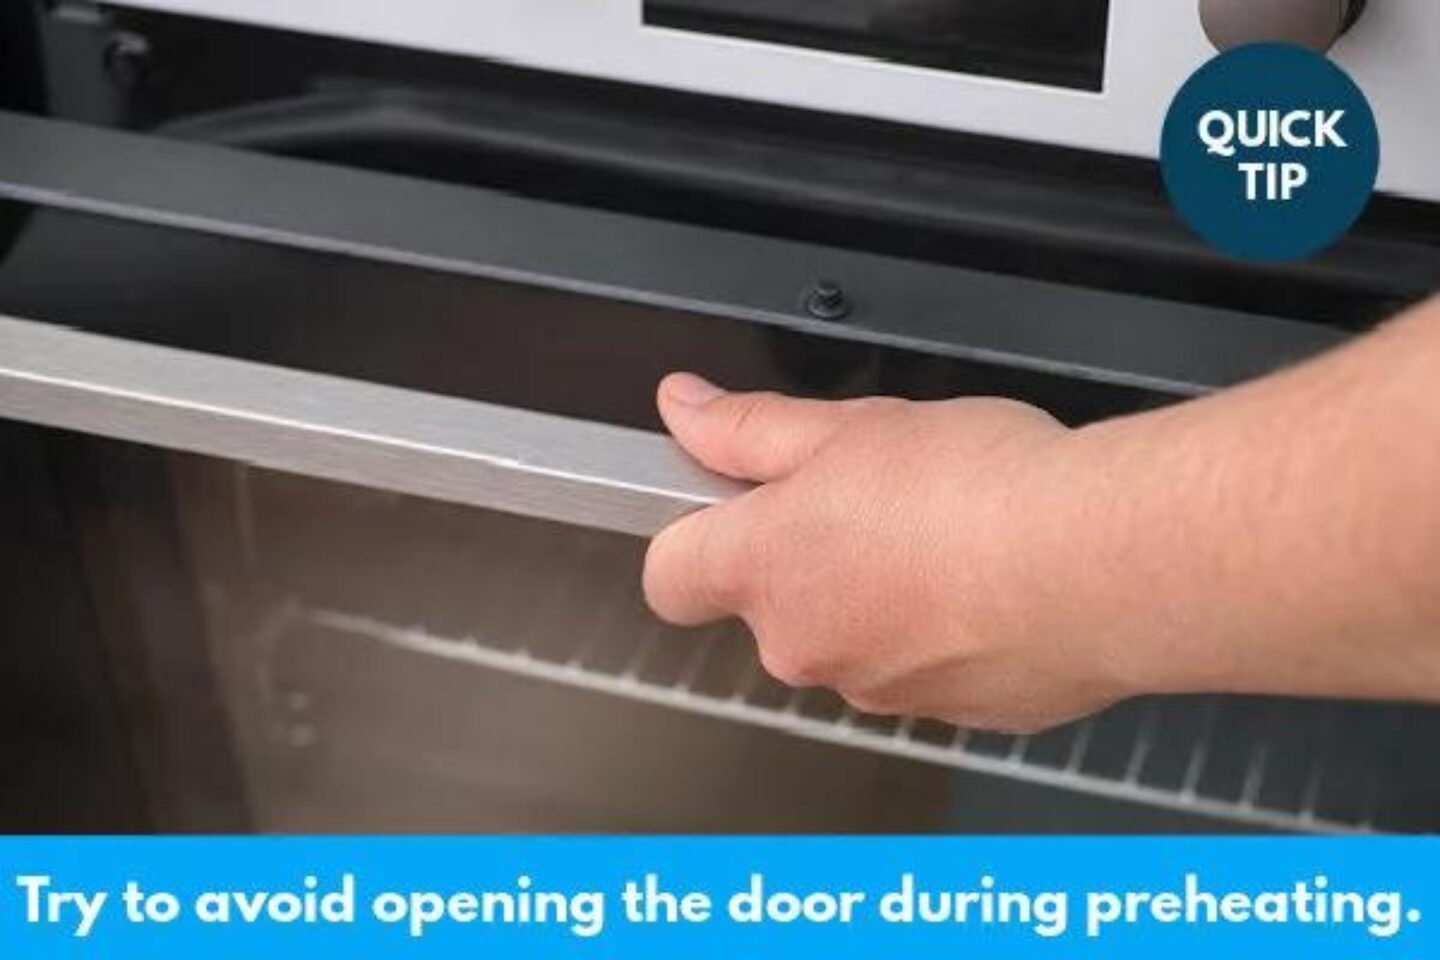 Oven preheating tip 3